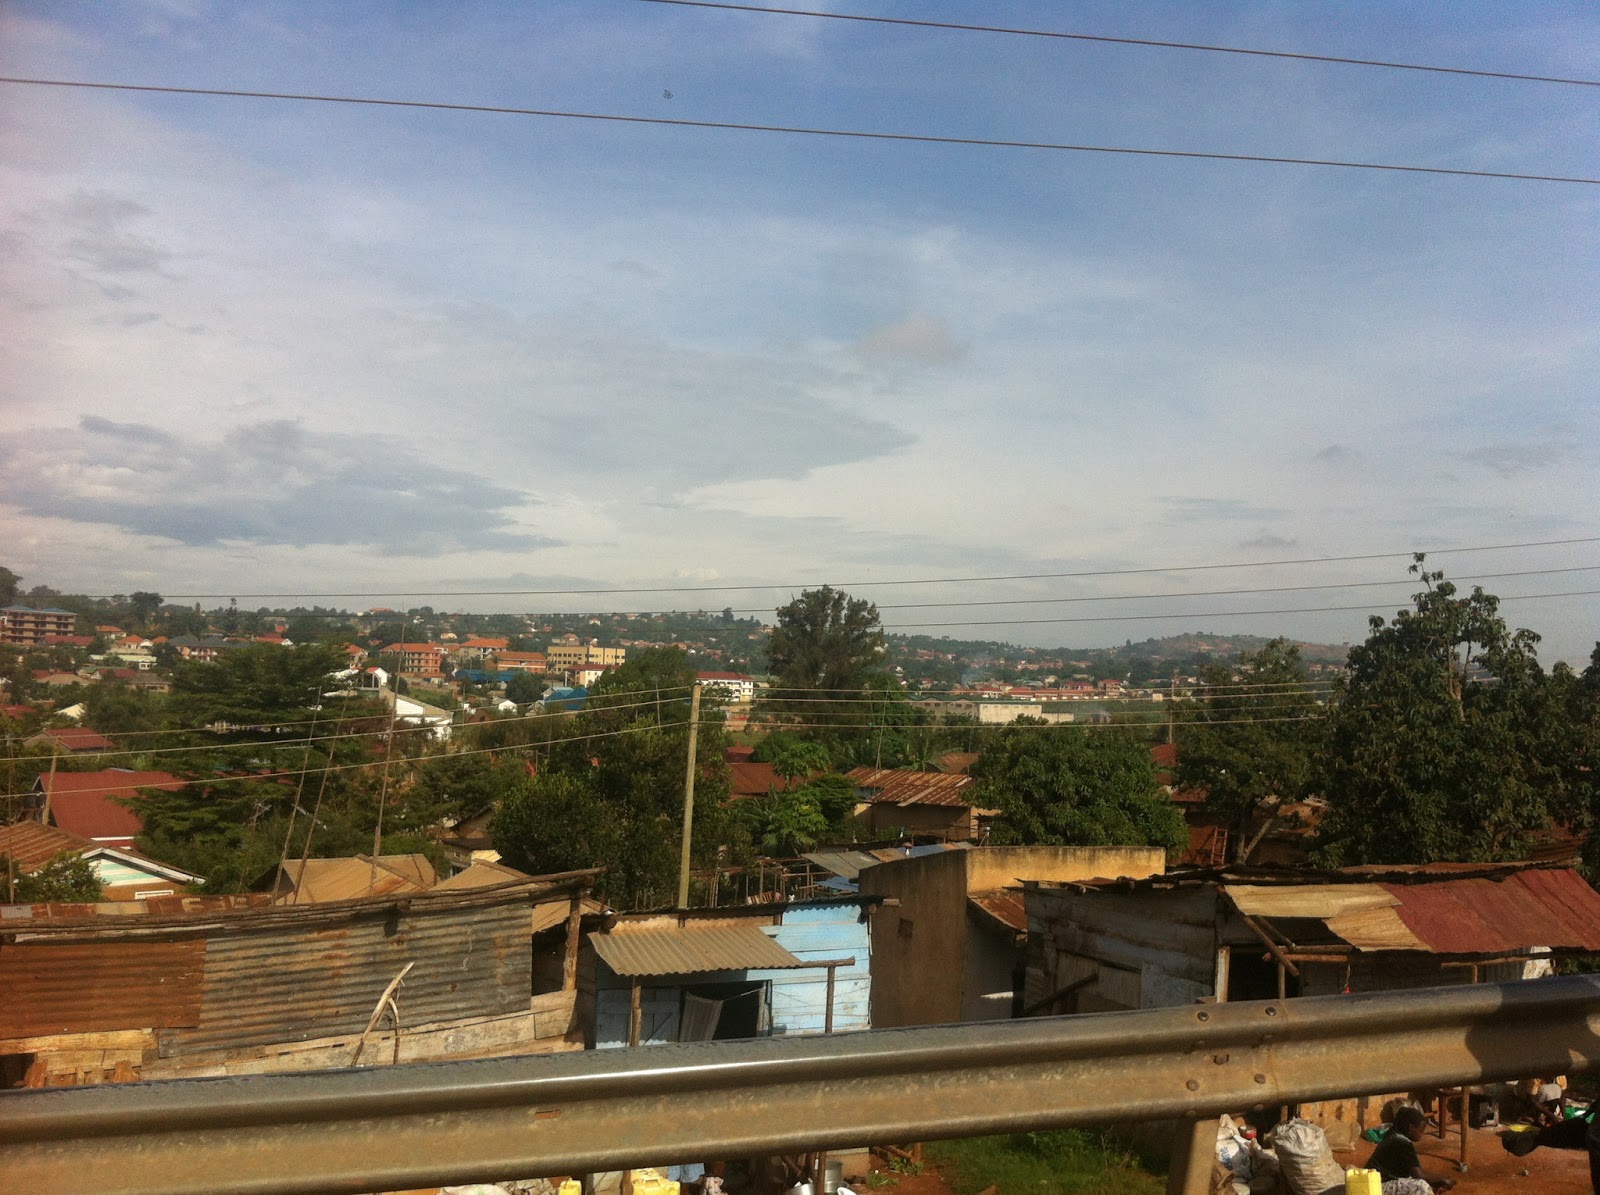 Five Things That Struck Me Upon Arrival In Uganda